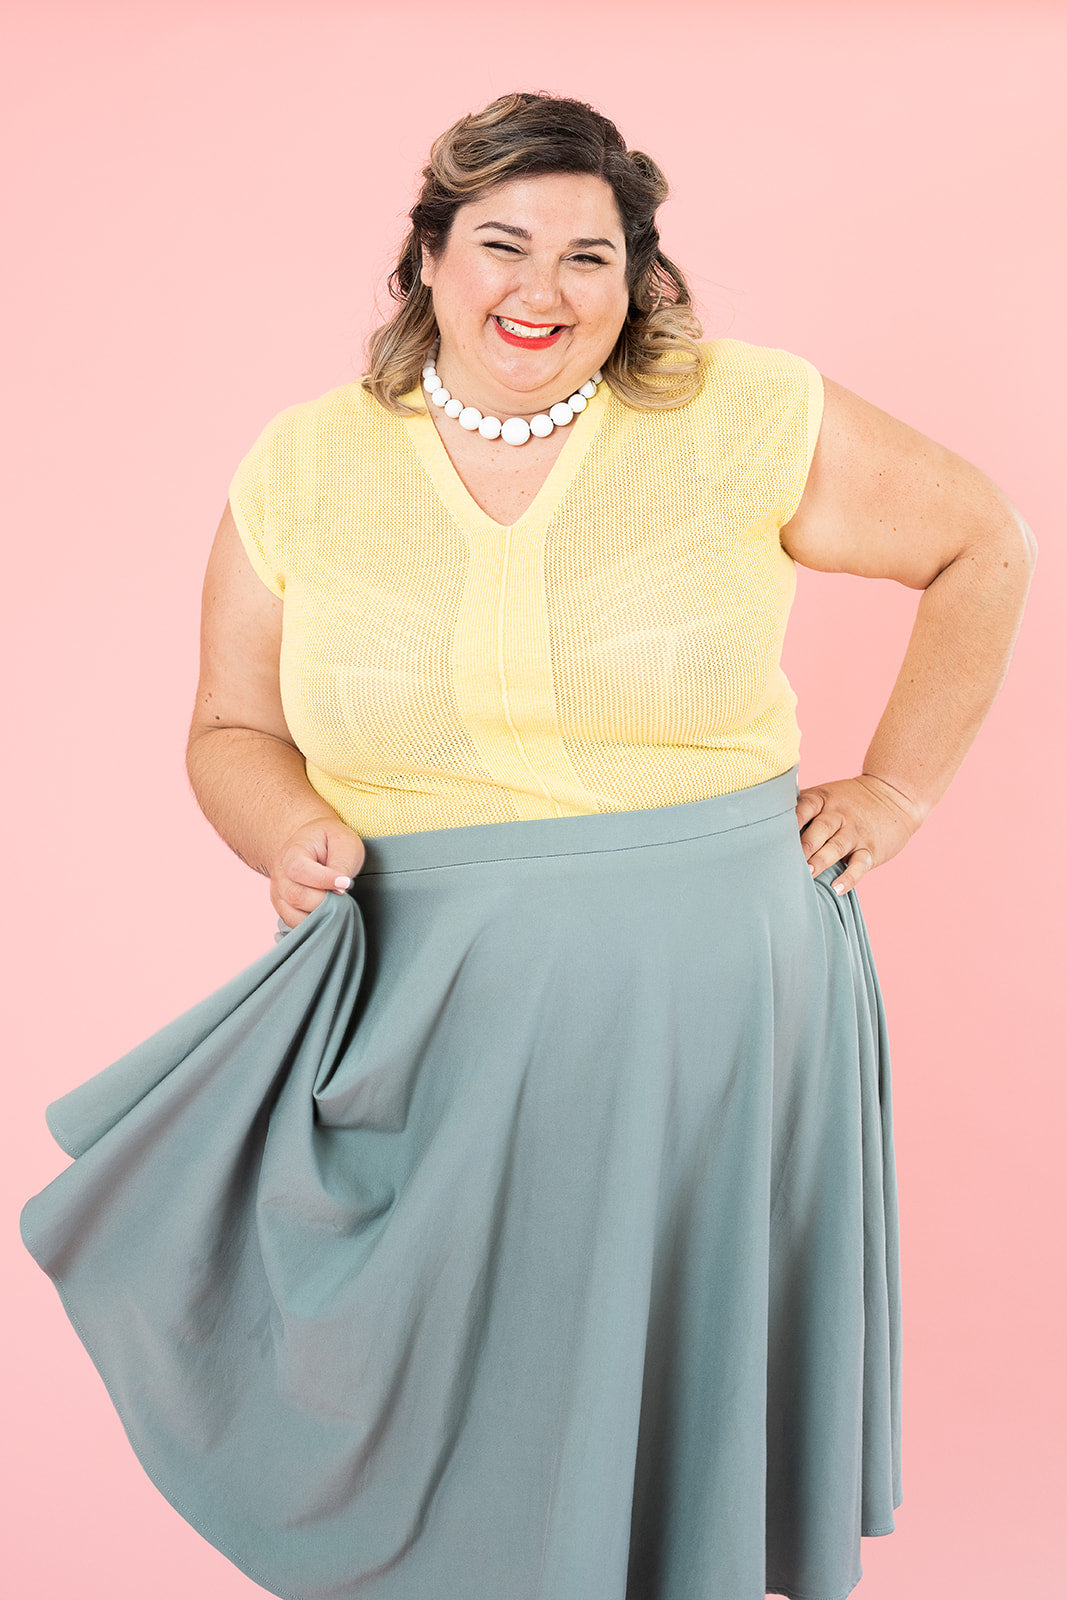 A plus-size white woman wearing a yellow top holds out the hem of her mint-coloured vintage-inspired skirt